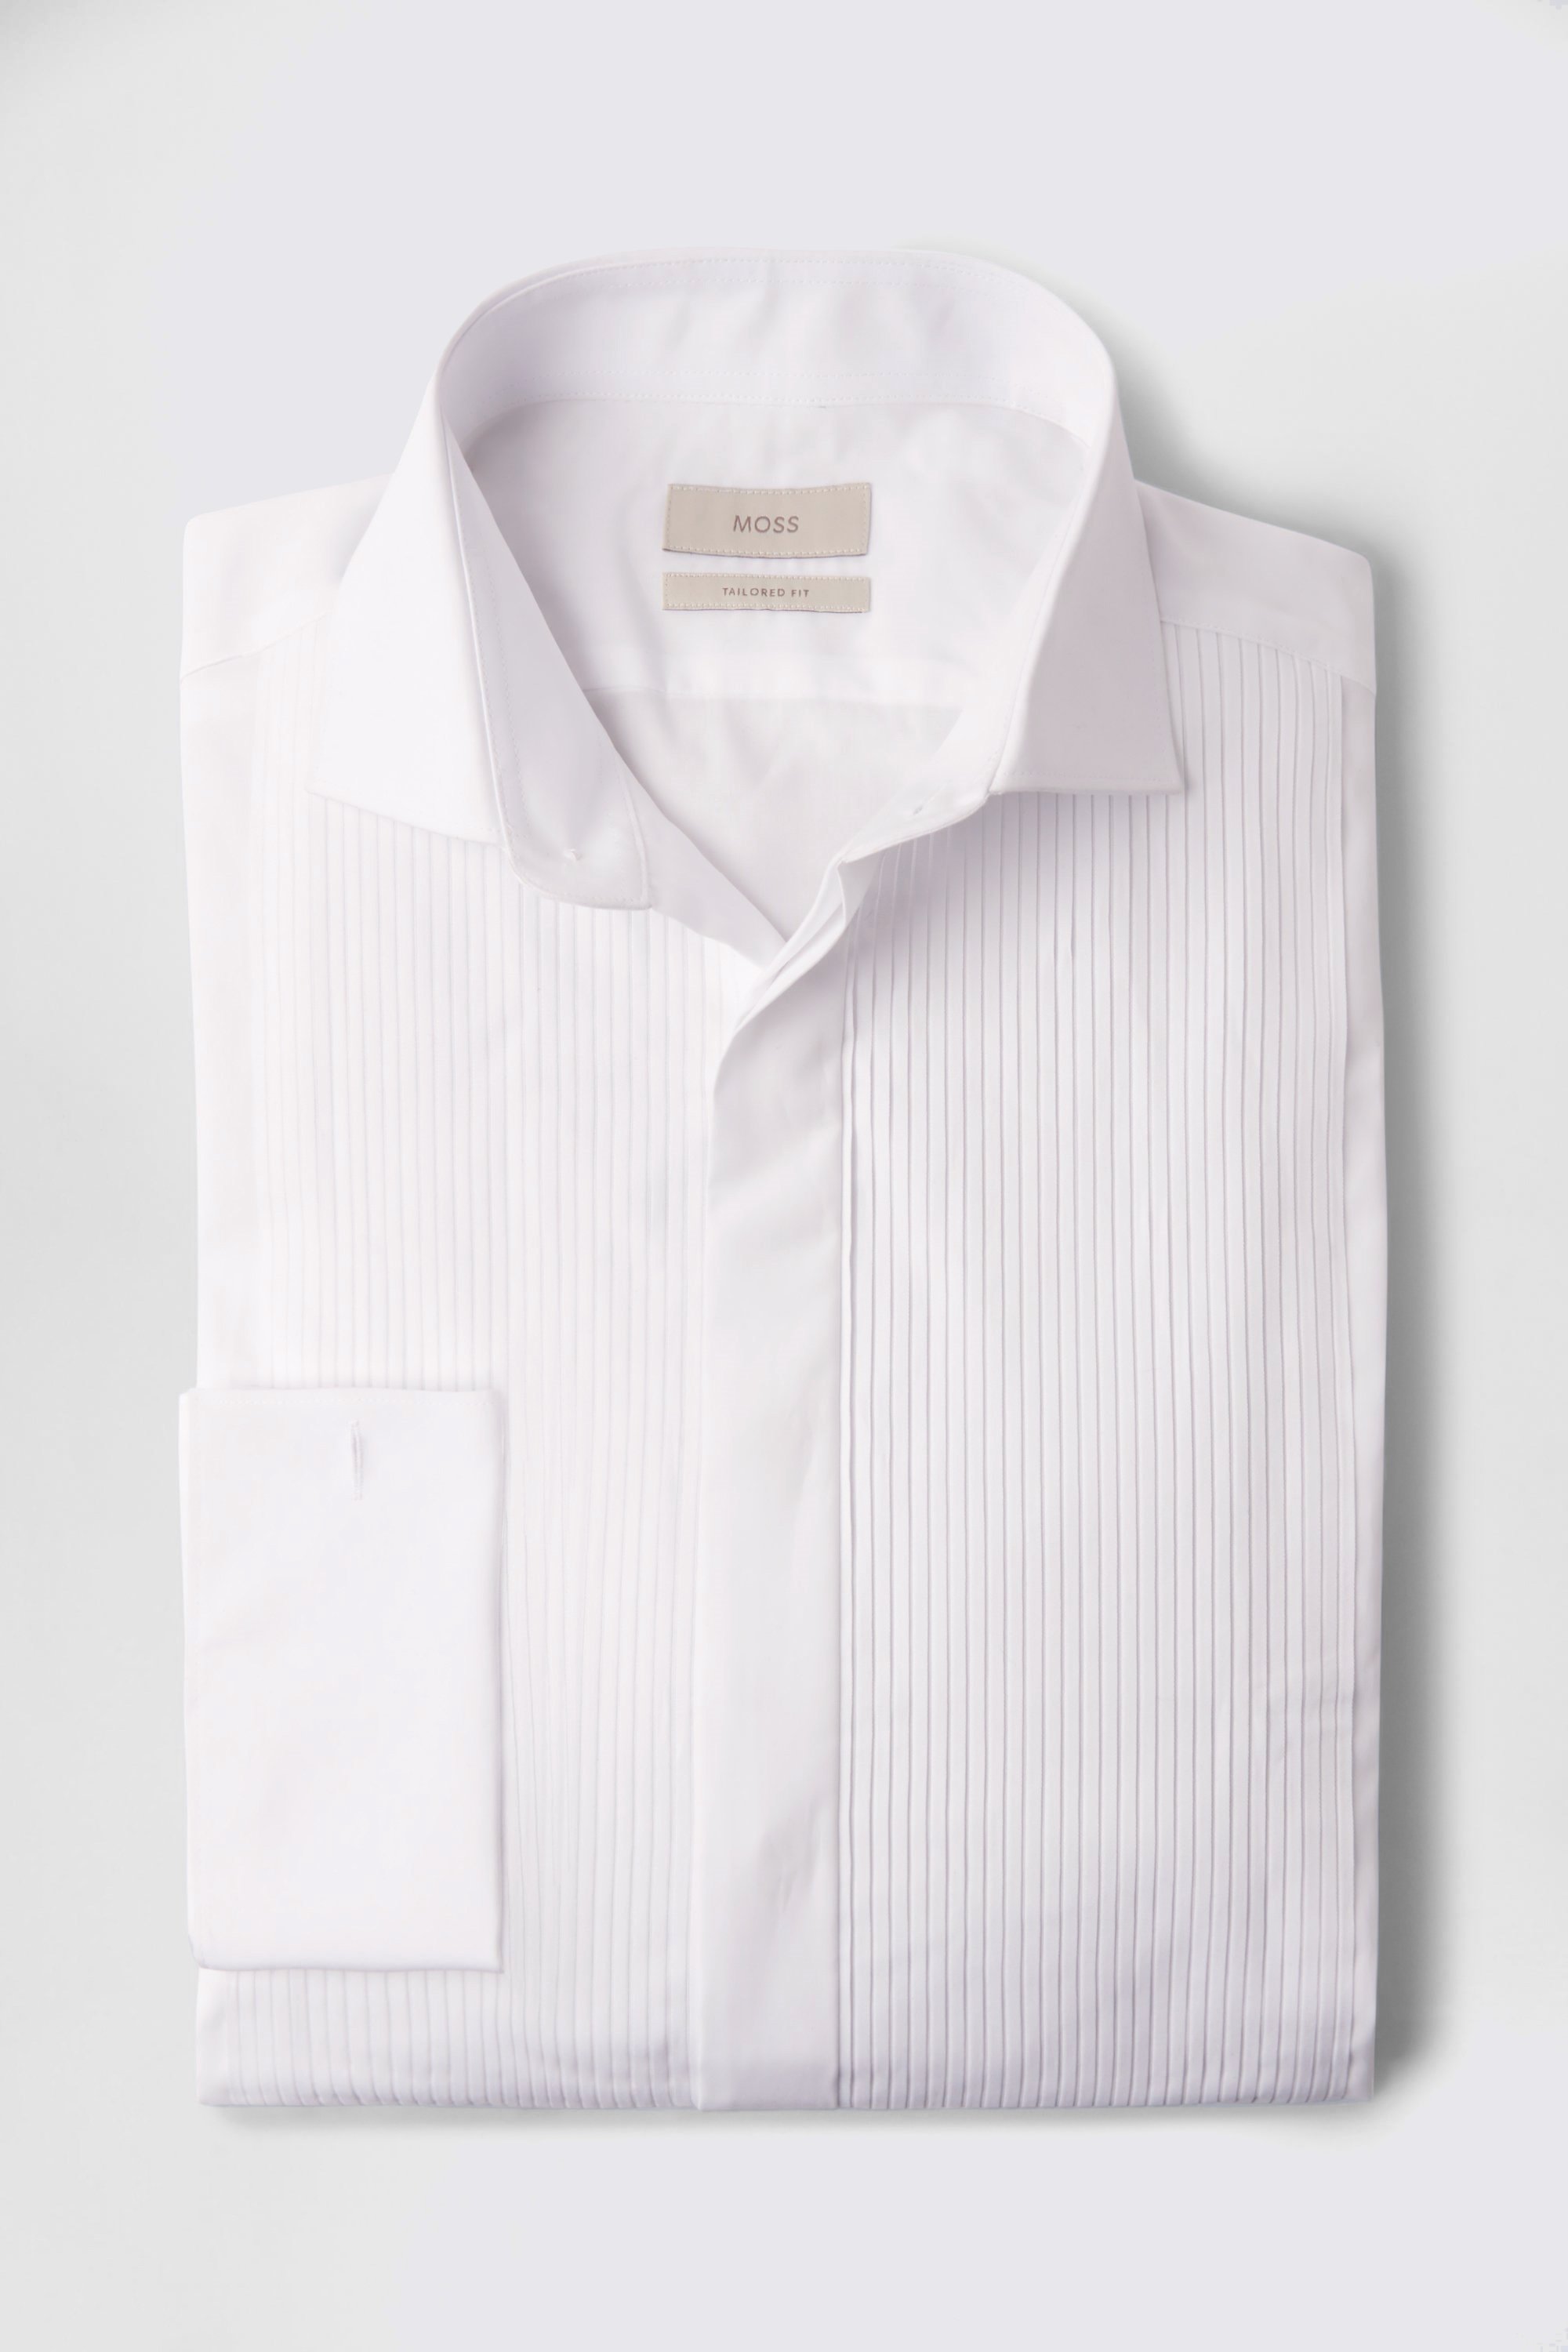 Tailored Fit White Pleated Dress Shirt | Buy Online at Moss